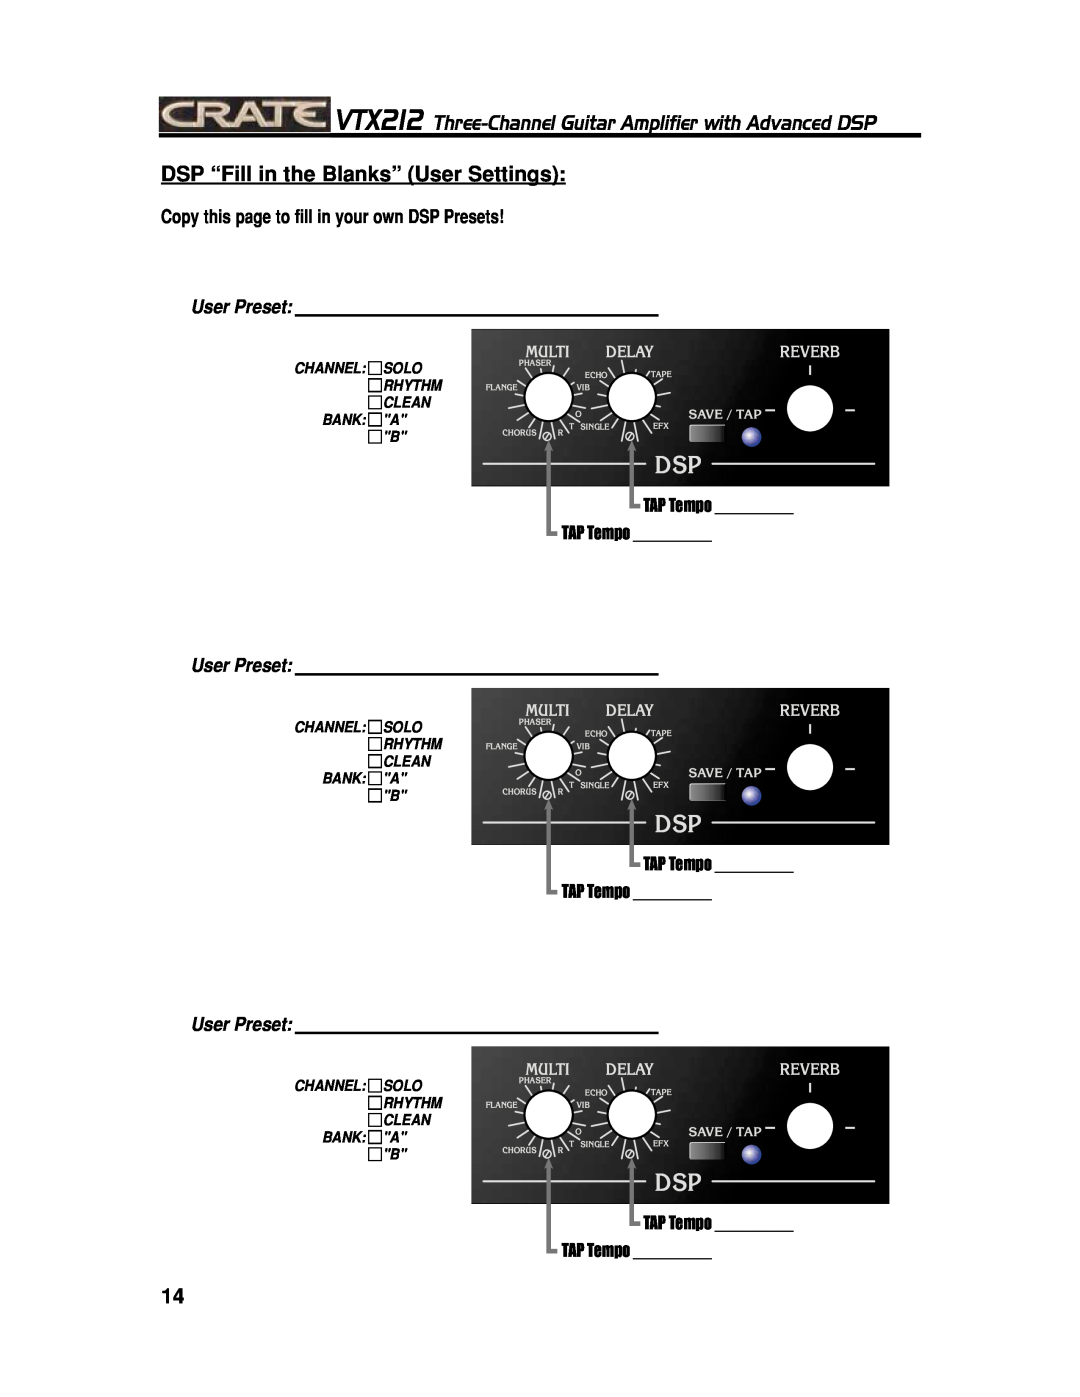 Crate Amplifiers VTX212 DSP “Fill in the Blanks” User Settings, Copy this page to fill in your own DSP Presets, Multi 